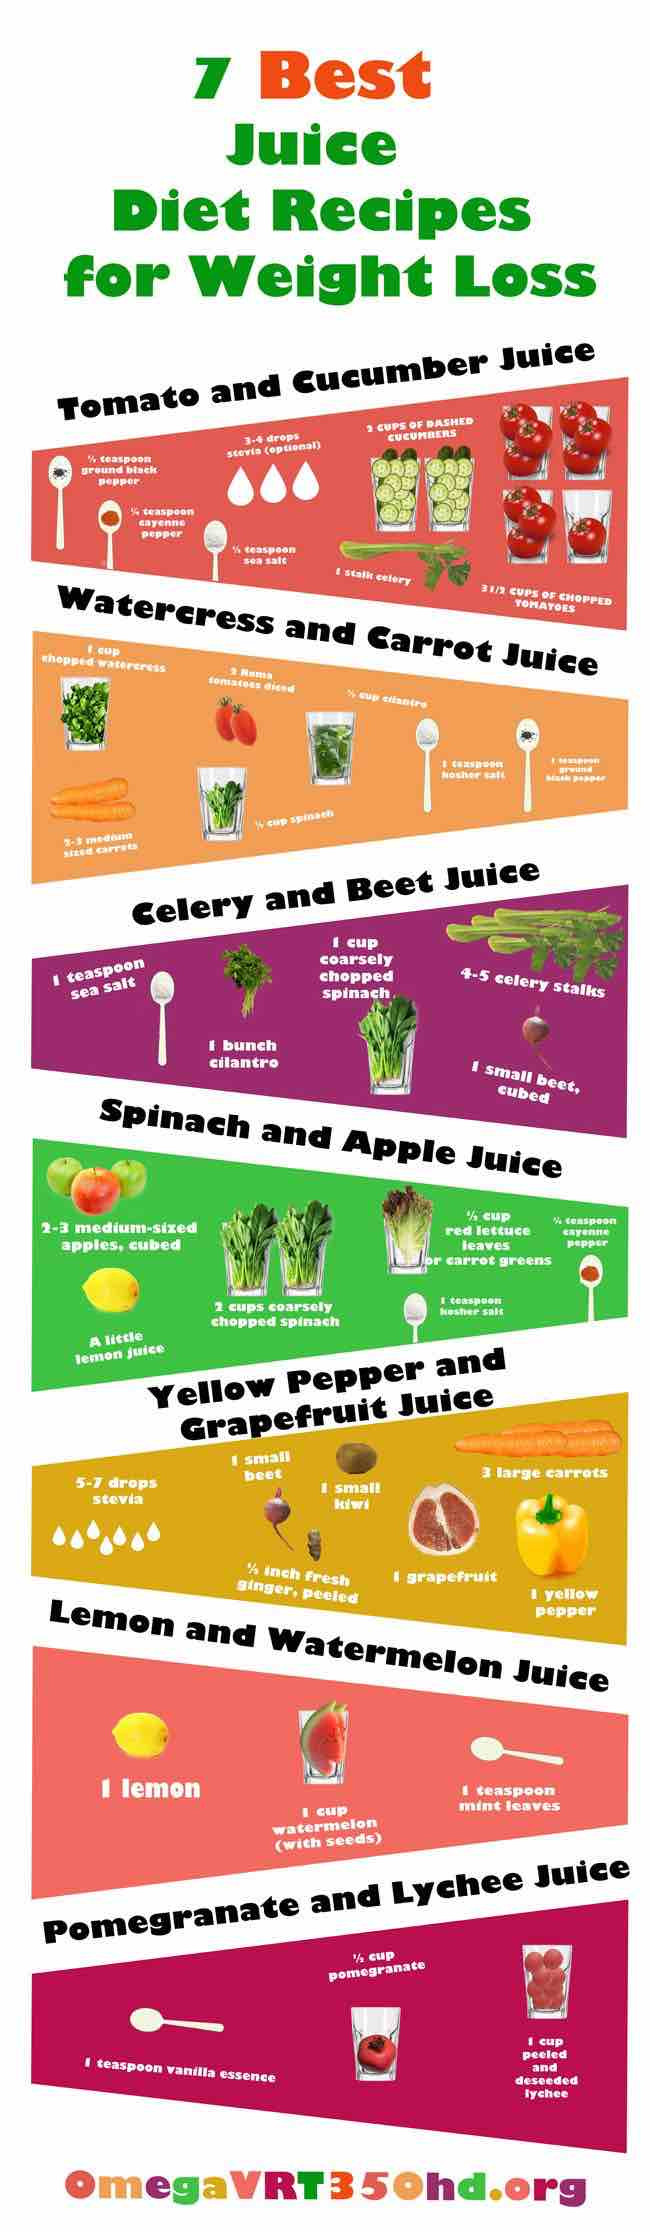 Best Juice Recipes For Weight Loss
 Juicing Recipes for Detoxing and Weight Loss MODwedding